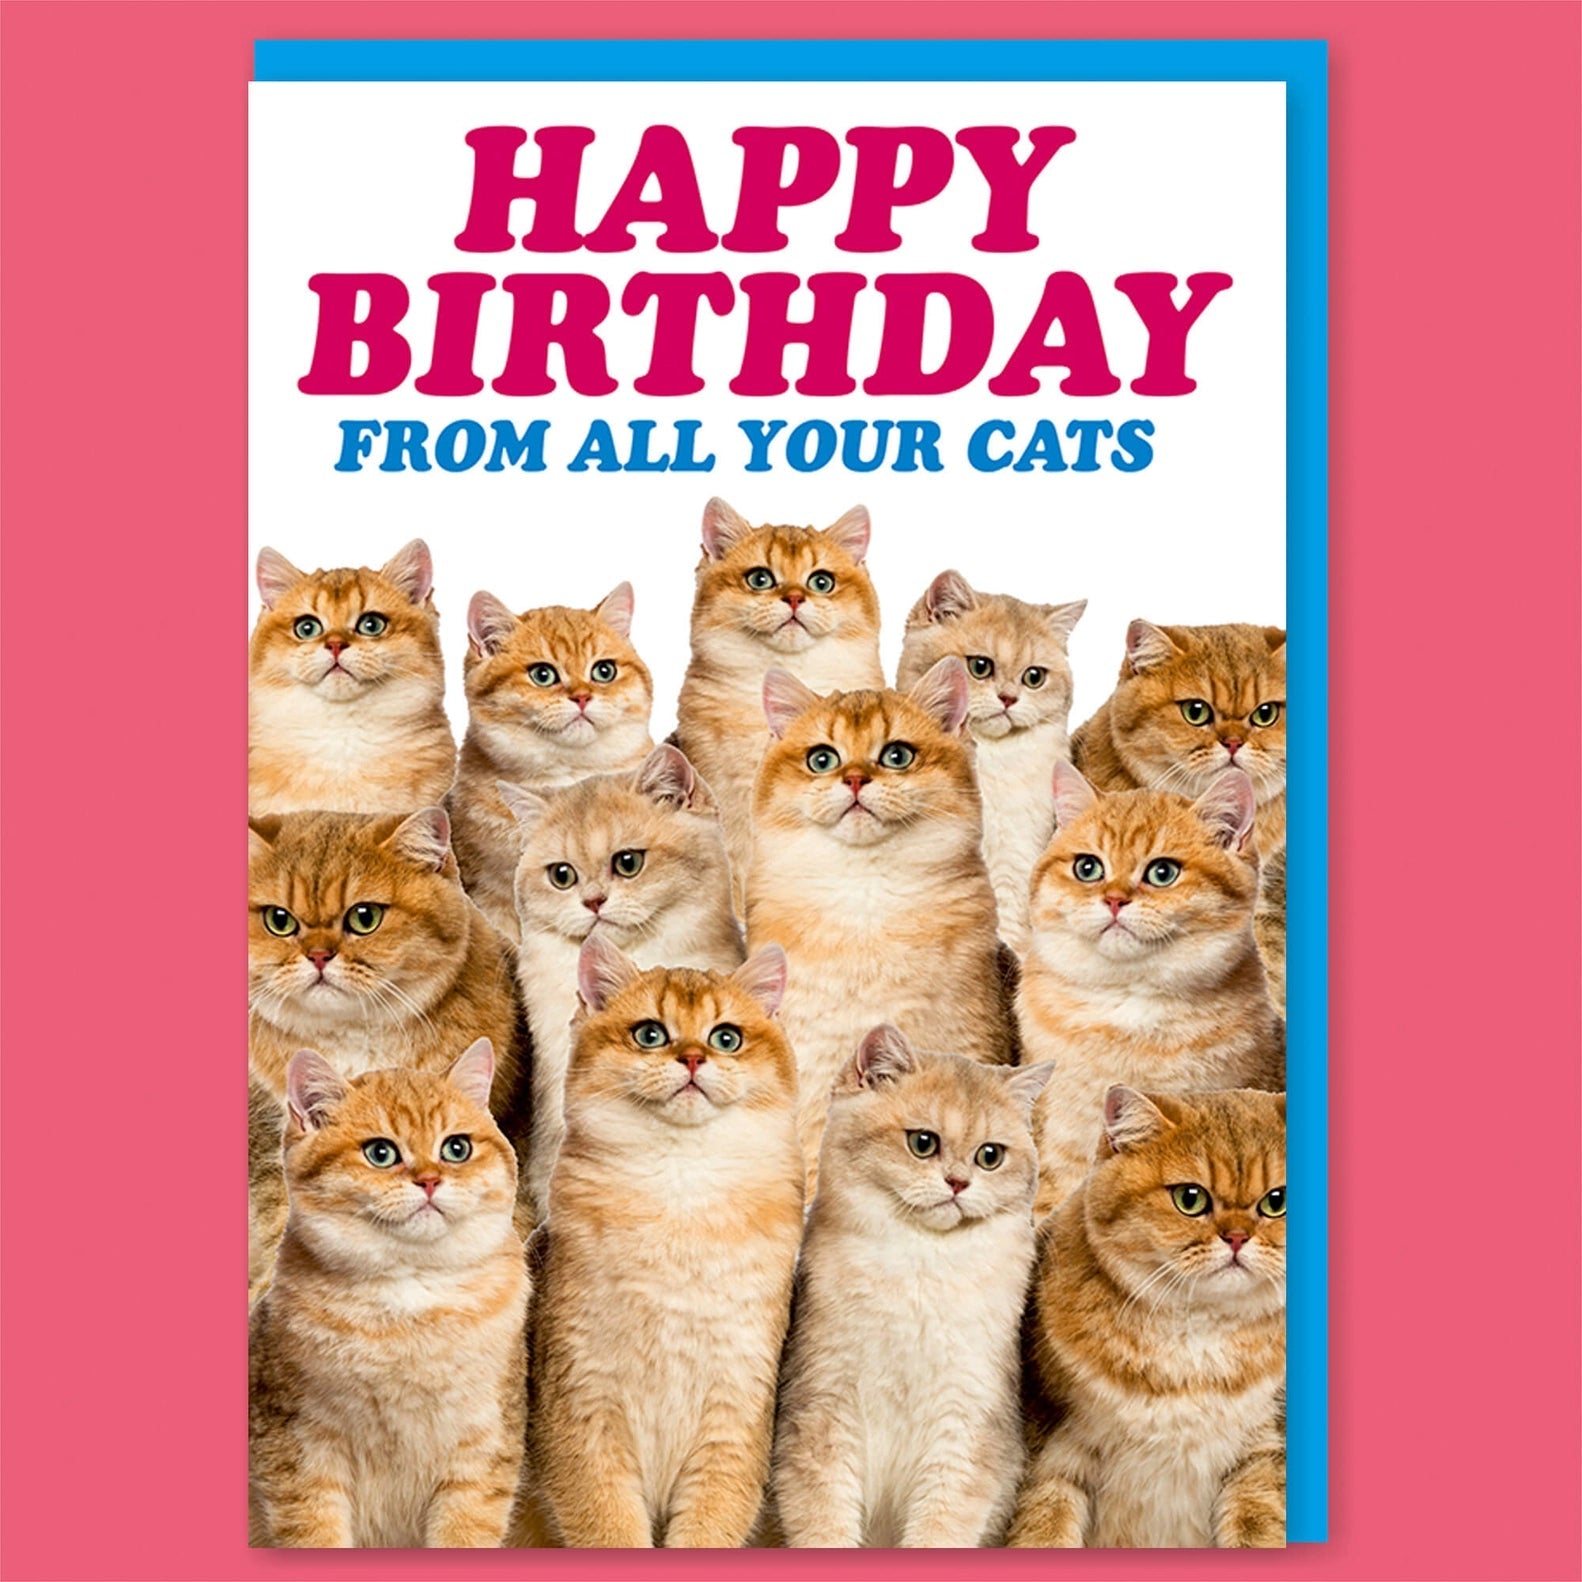 Happy Birthday From All Your Cats Greeting Card